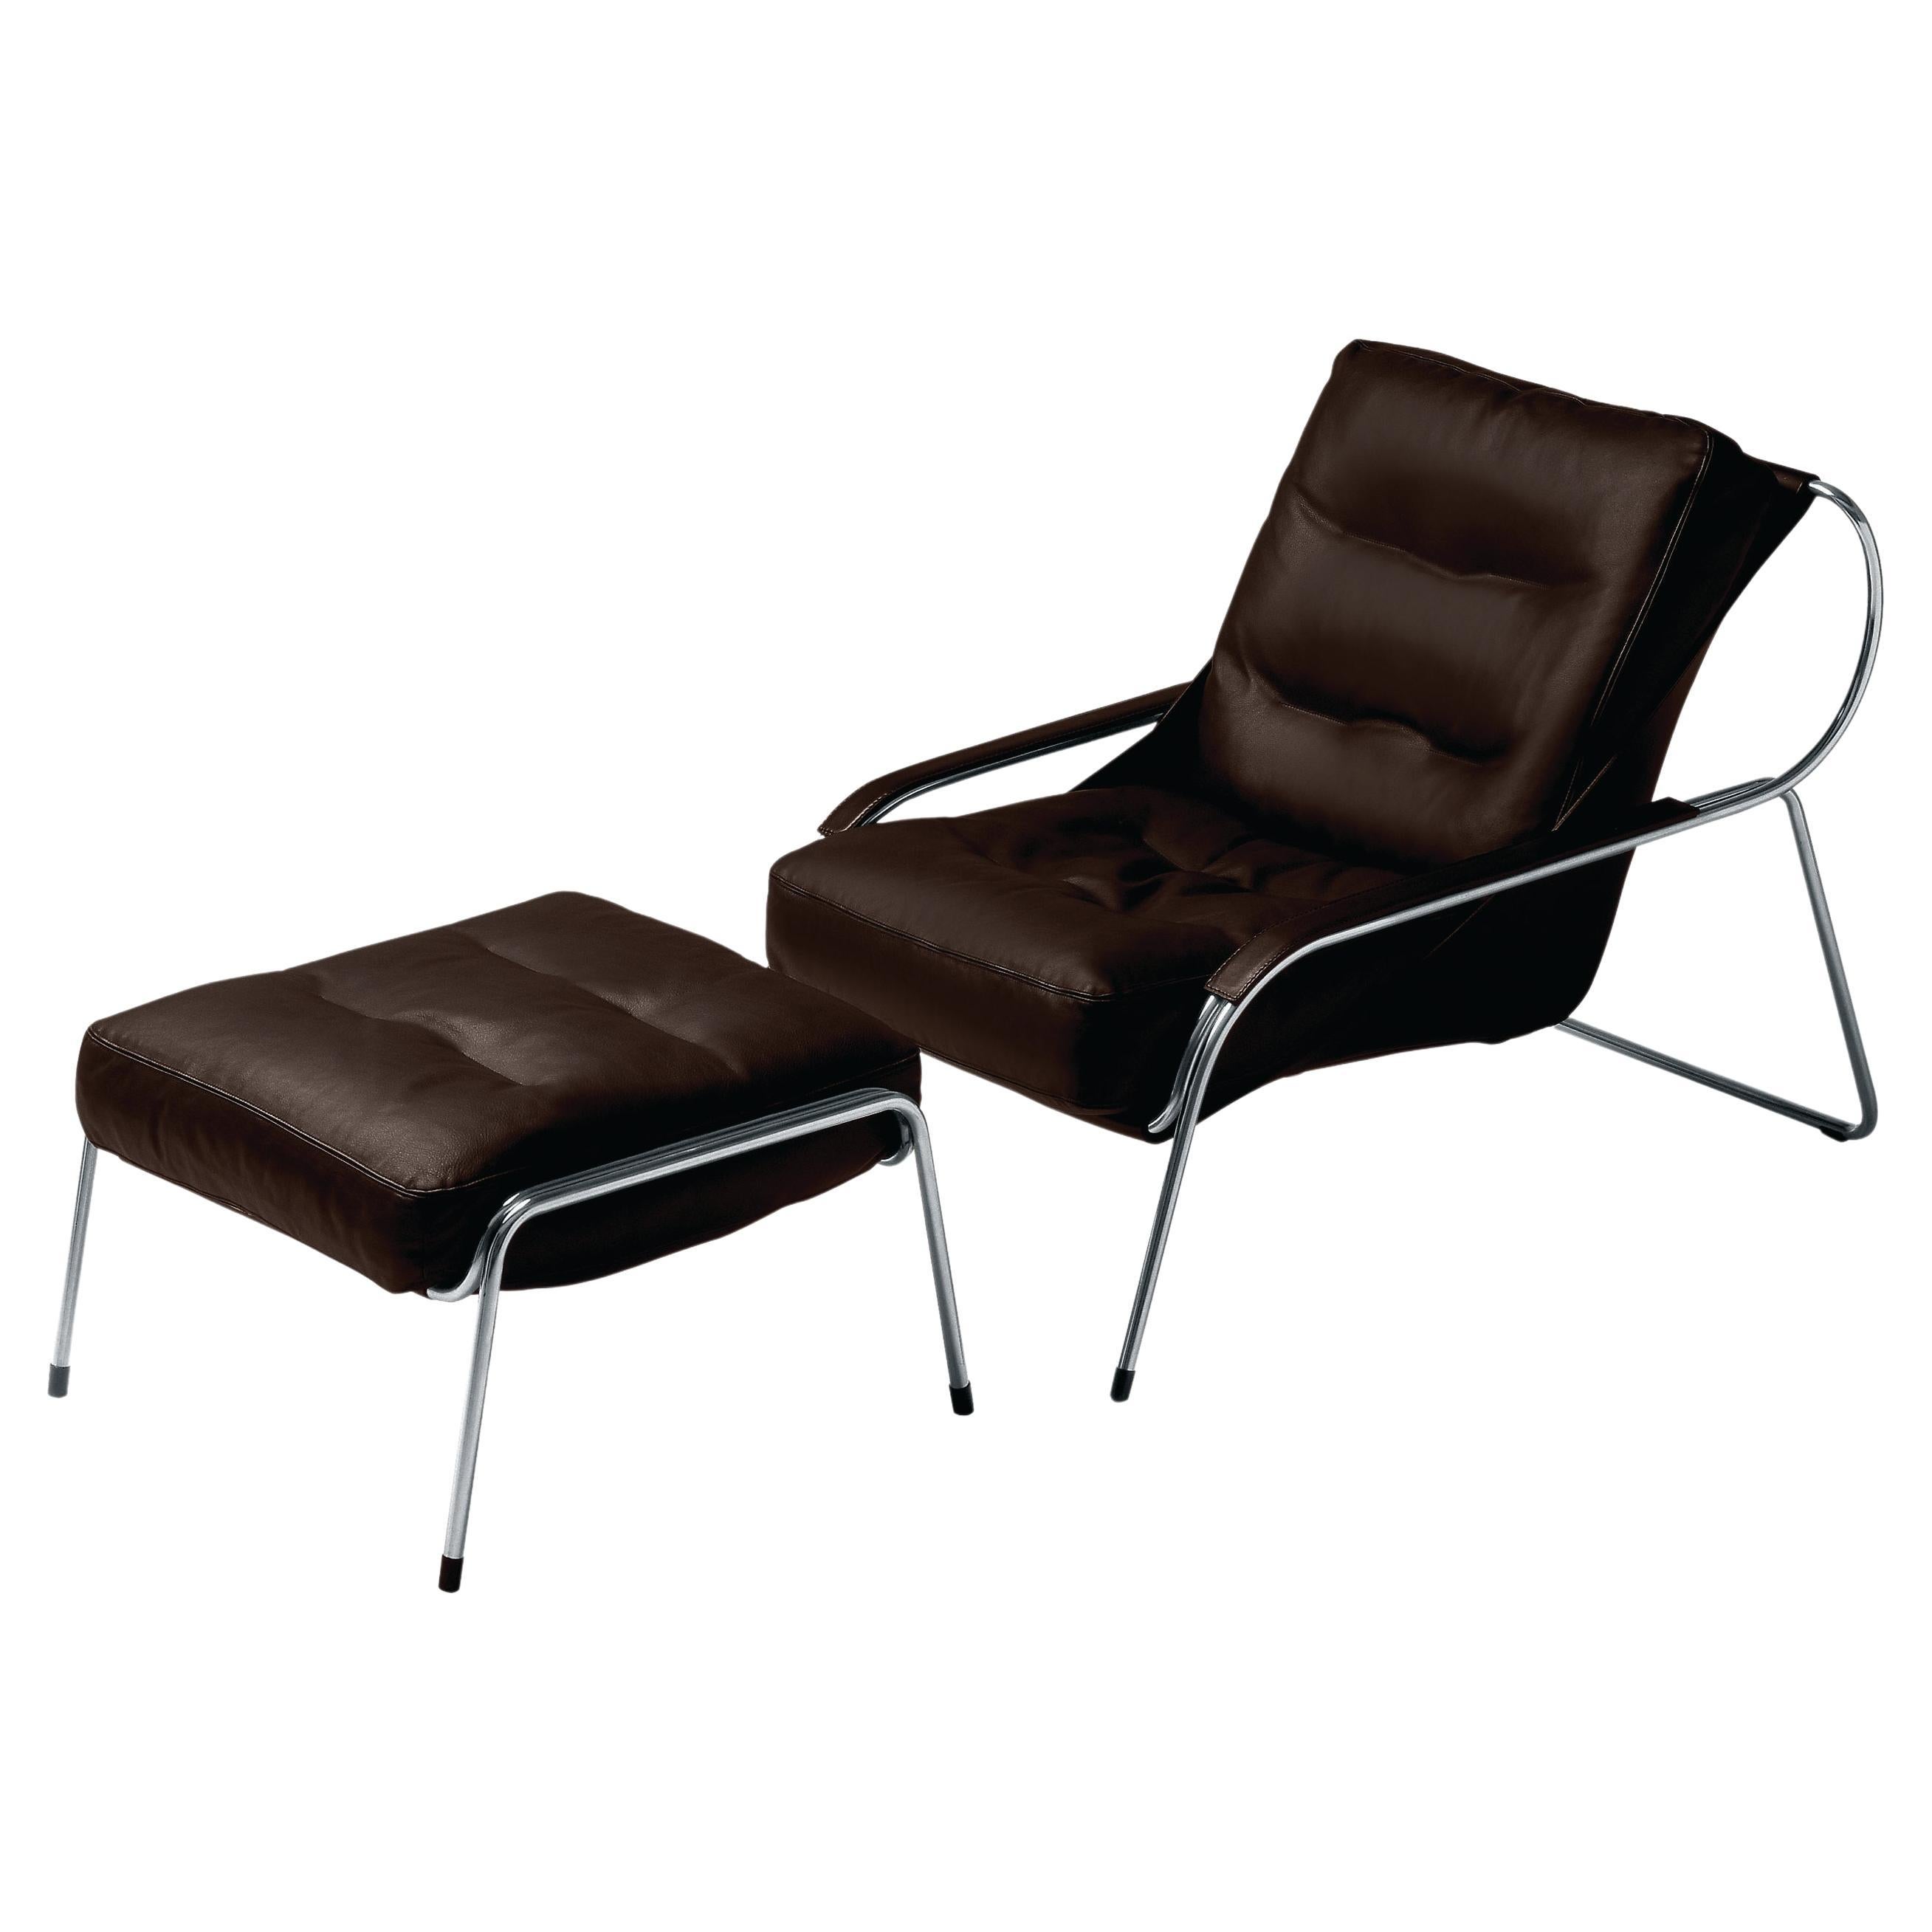 Zanotta Maggiolina Lounge Chair with Pouf in Brown Leather & Steel Frame